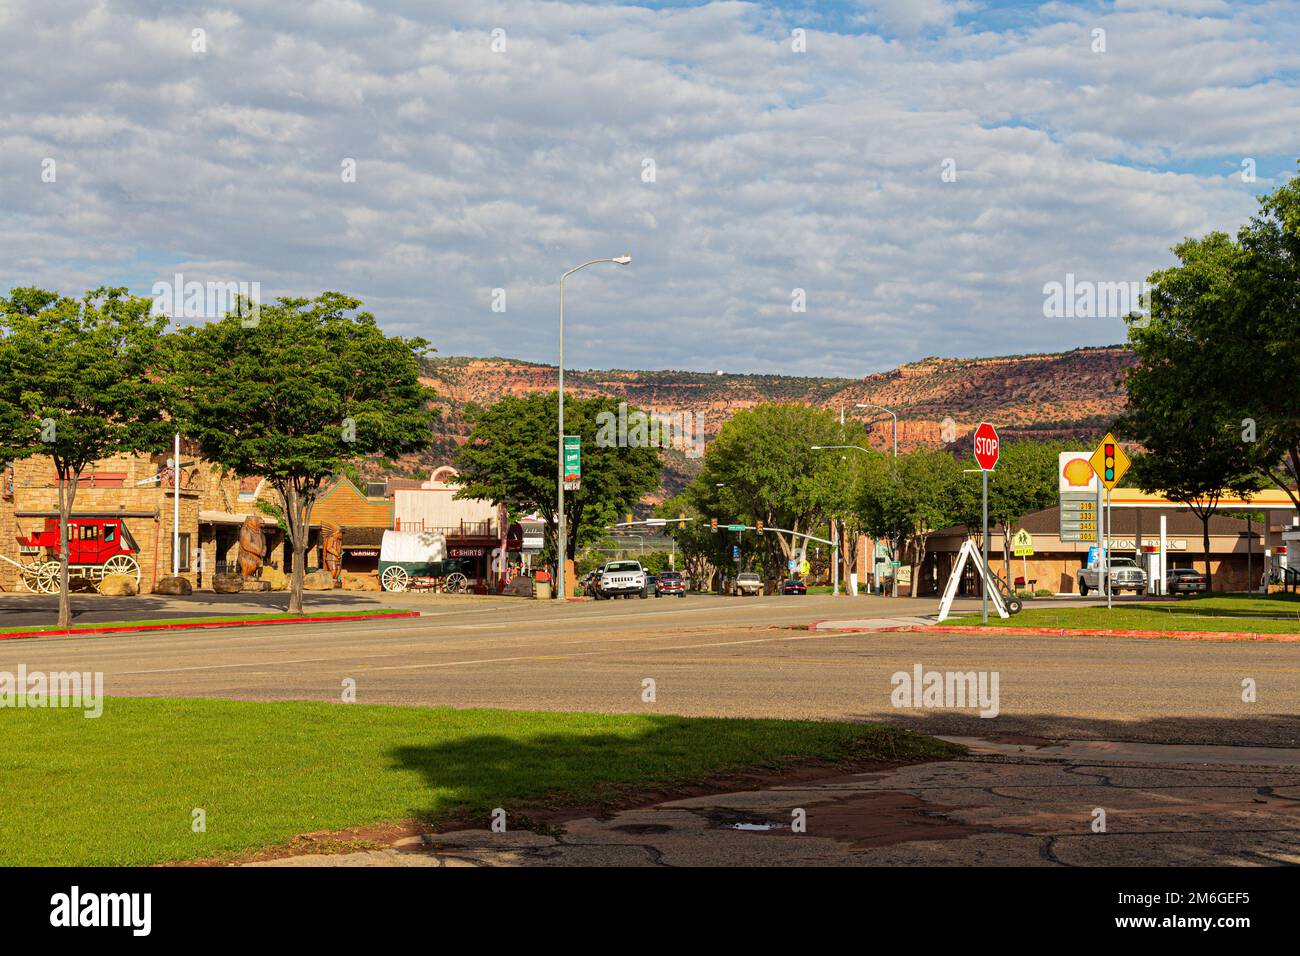 Kanab s a city in and the county seat of Kane County, Utah - ideally situated for visiting Bryce Canyon, Grand Canyon (North Rim) and Zion NP Stock Photo